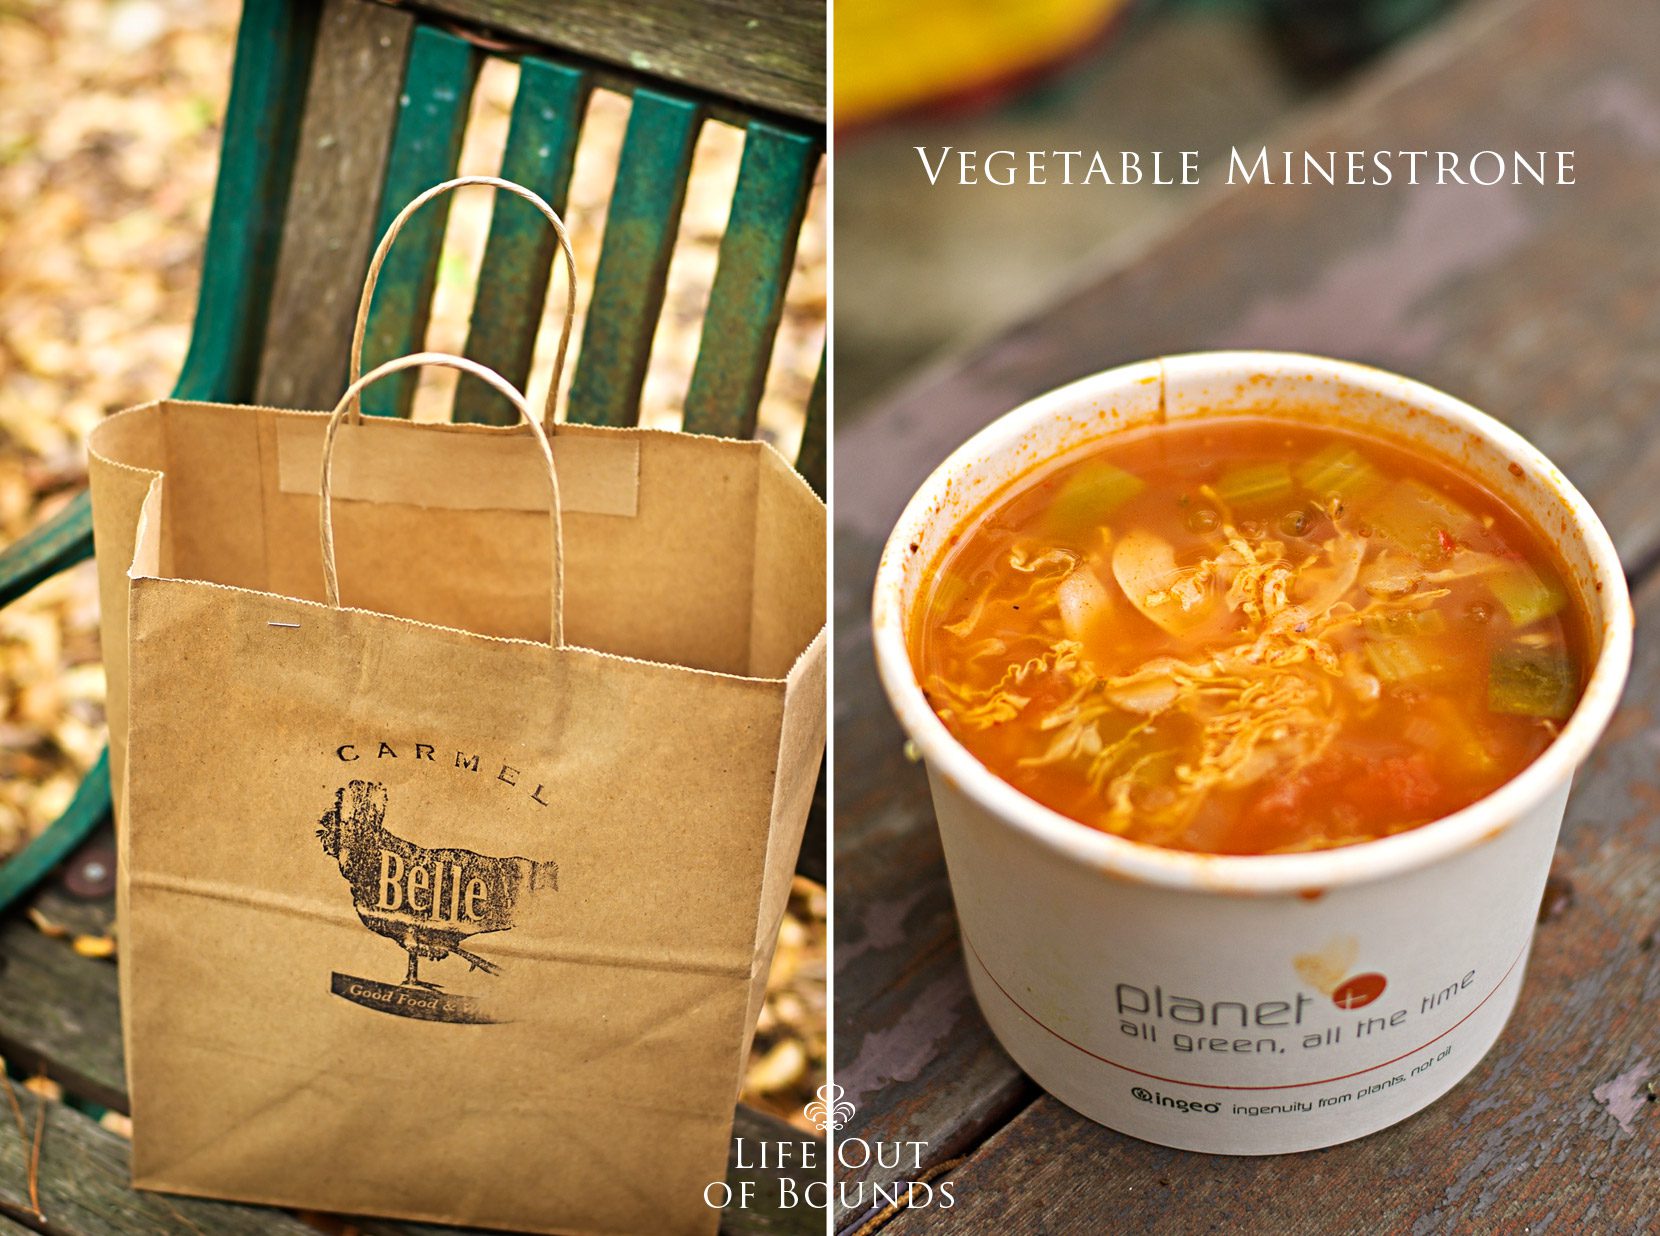 Vegetable-Minestrone-take-out-by-Carmel-Belle-cafe-in-Carmel-by-the-Sea-California